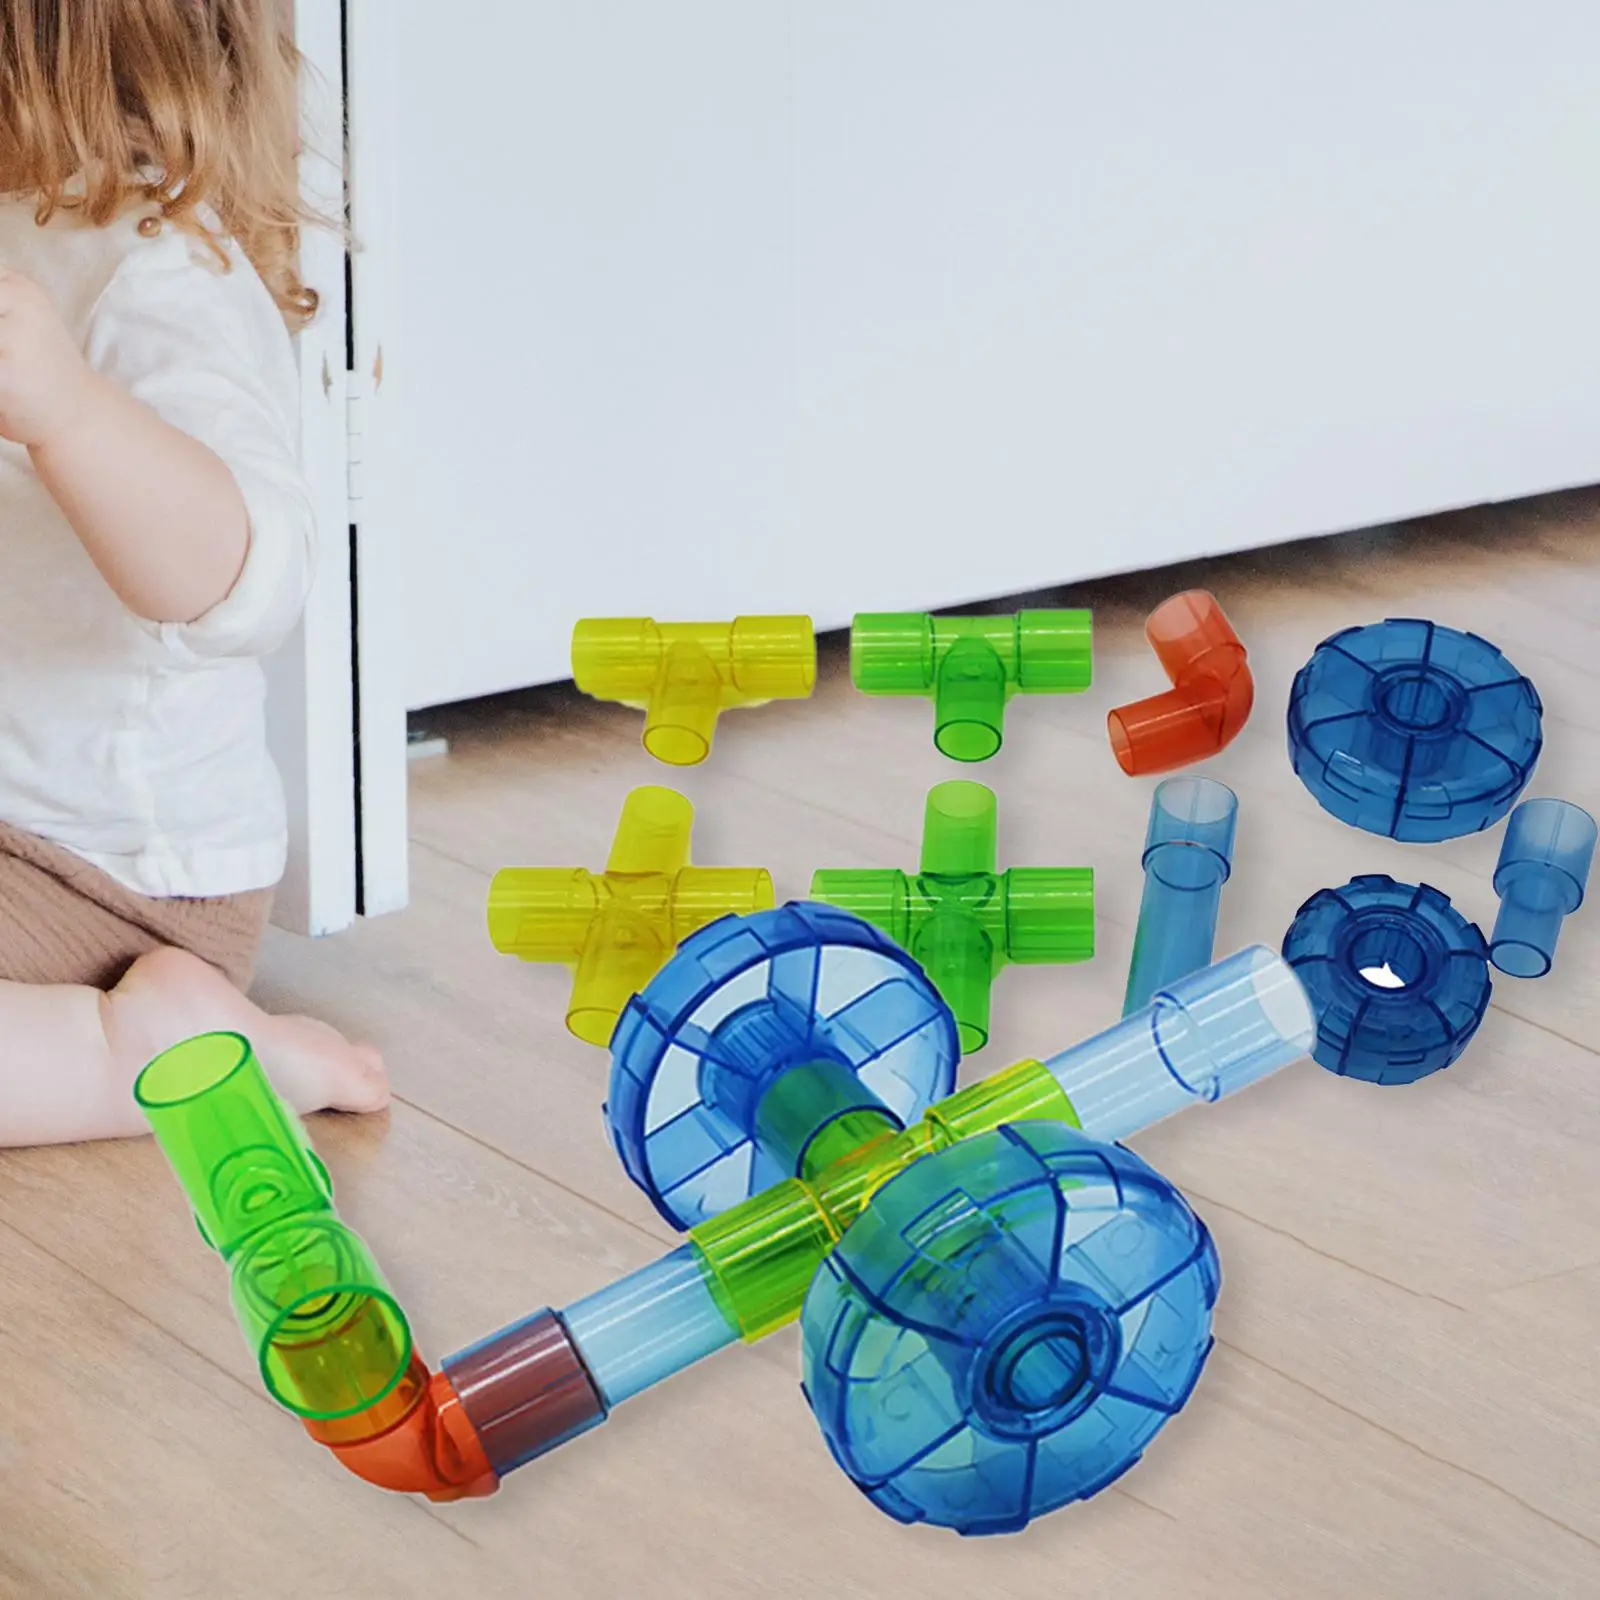 Pipe Tube Toy Learning Toy Educational Stem Building Learning for Toddlers Kids Boy Girls